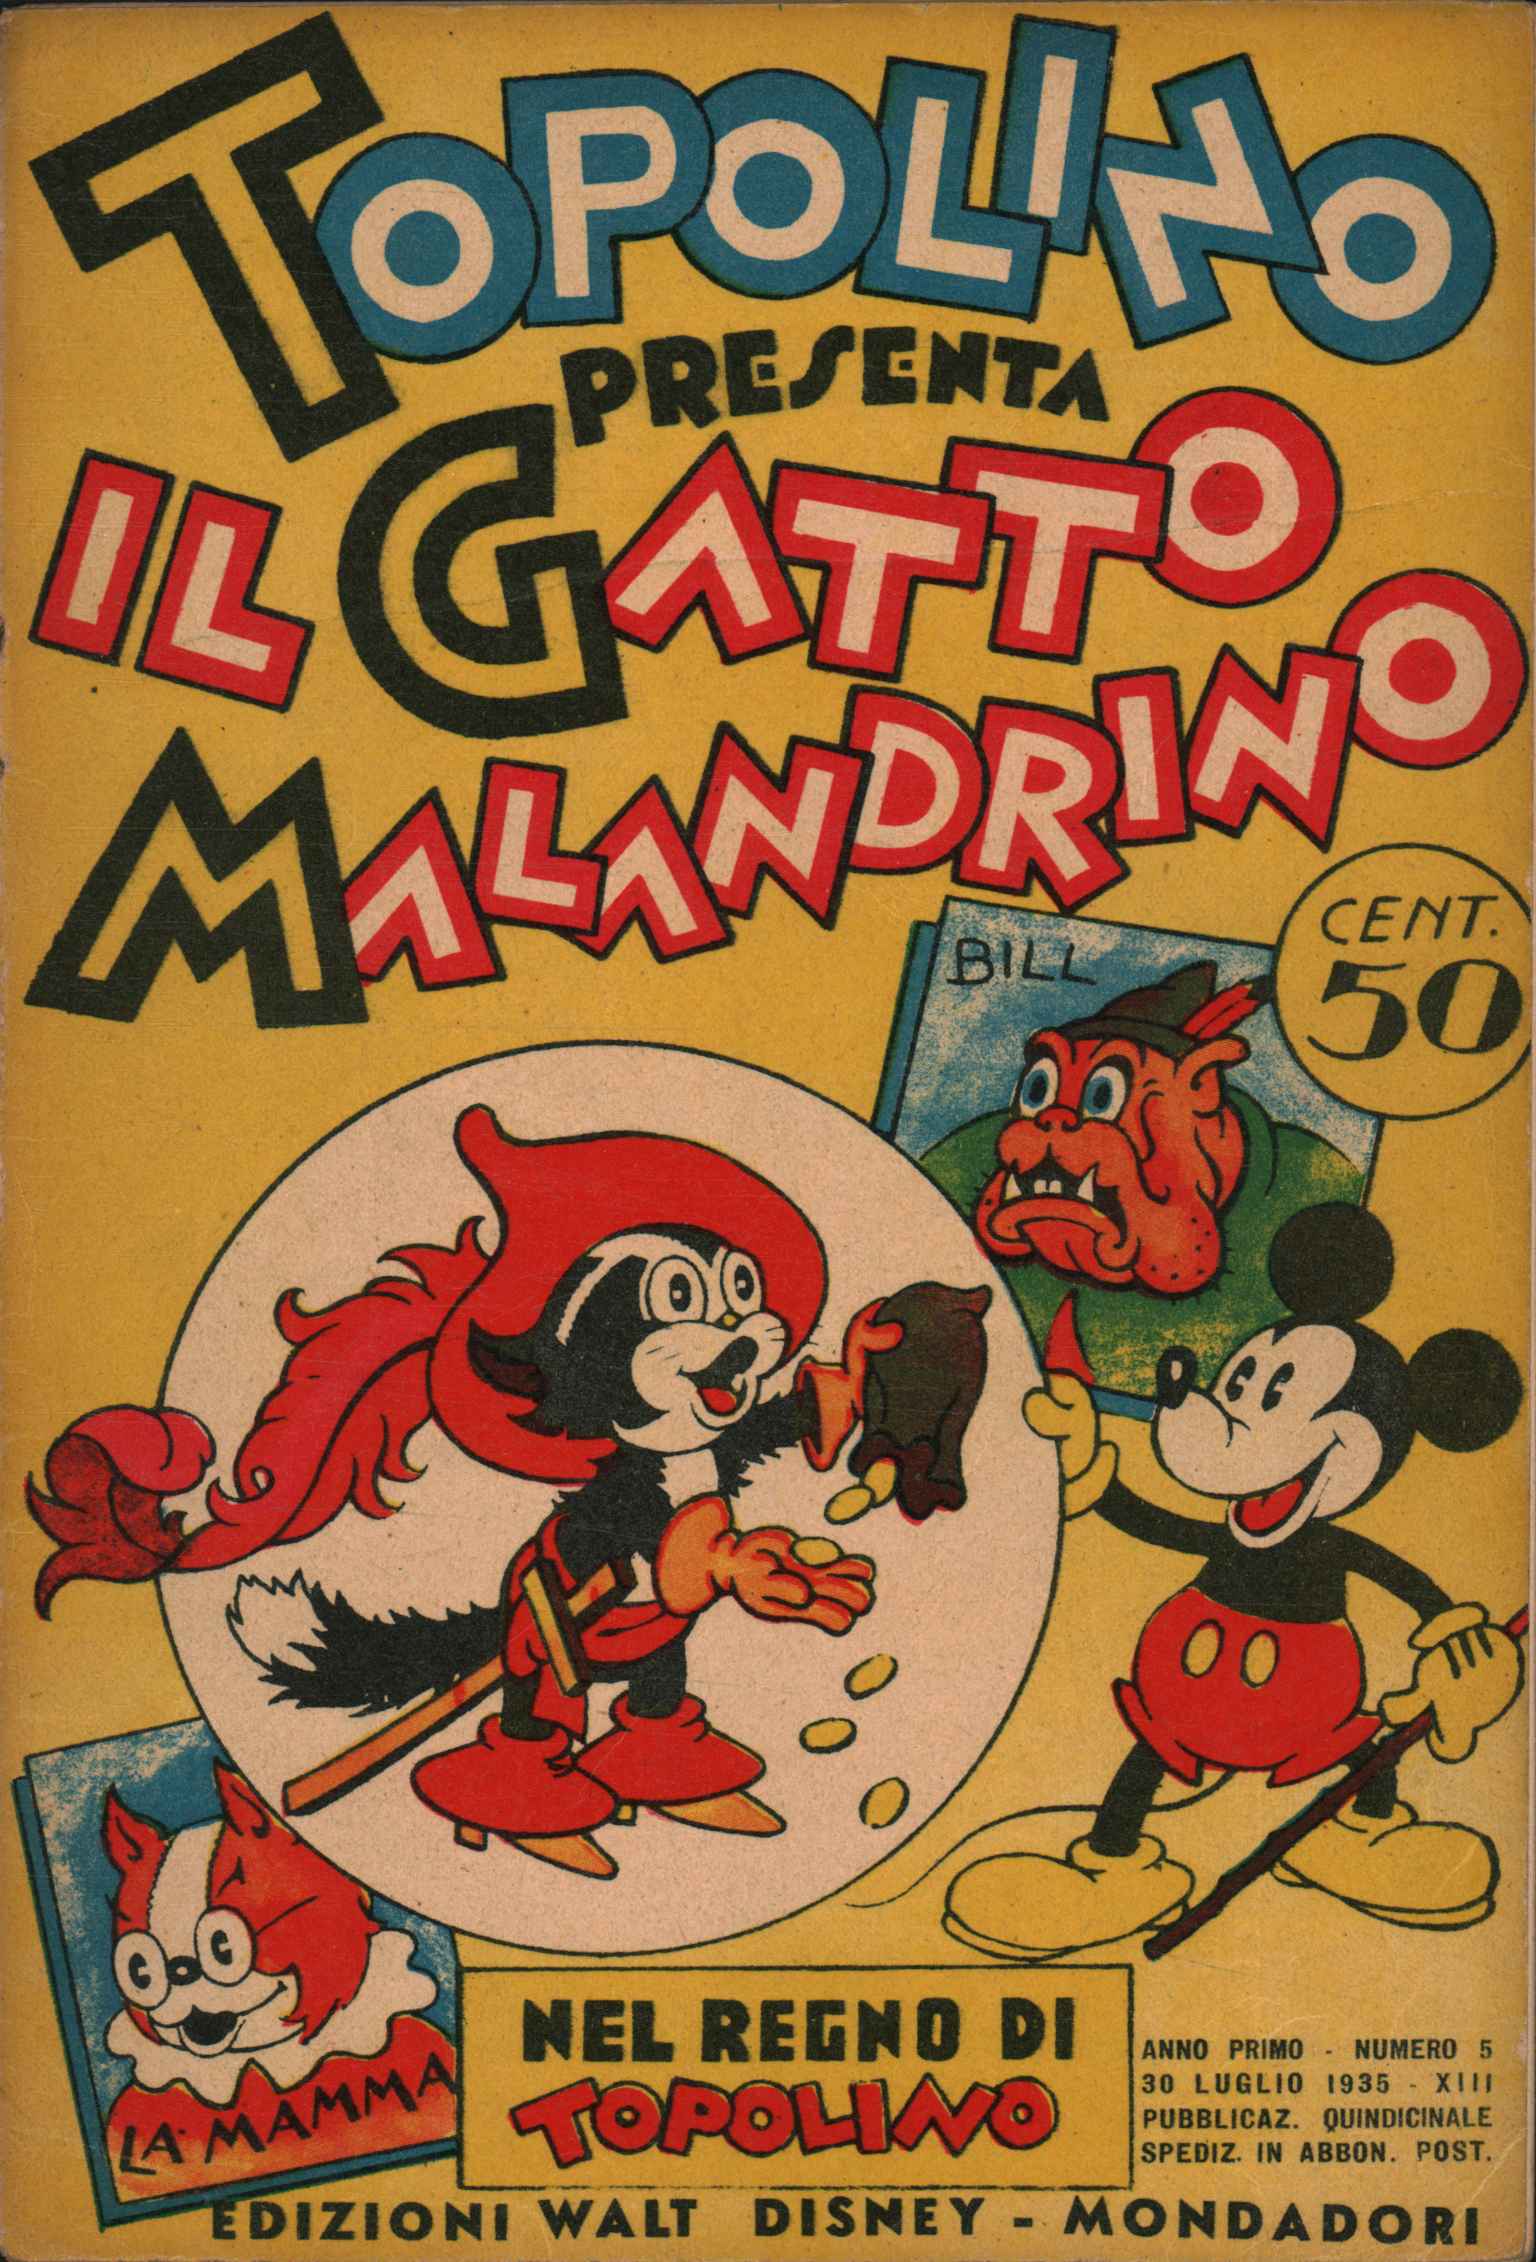 Mickey Mouse introduces the mischievous cat